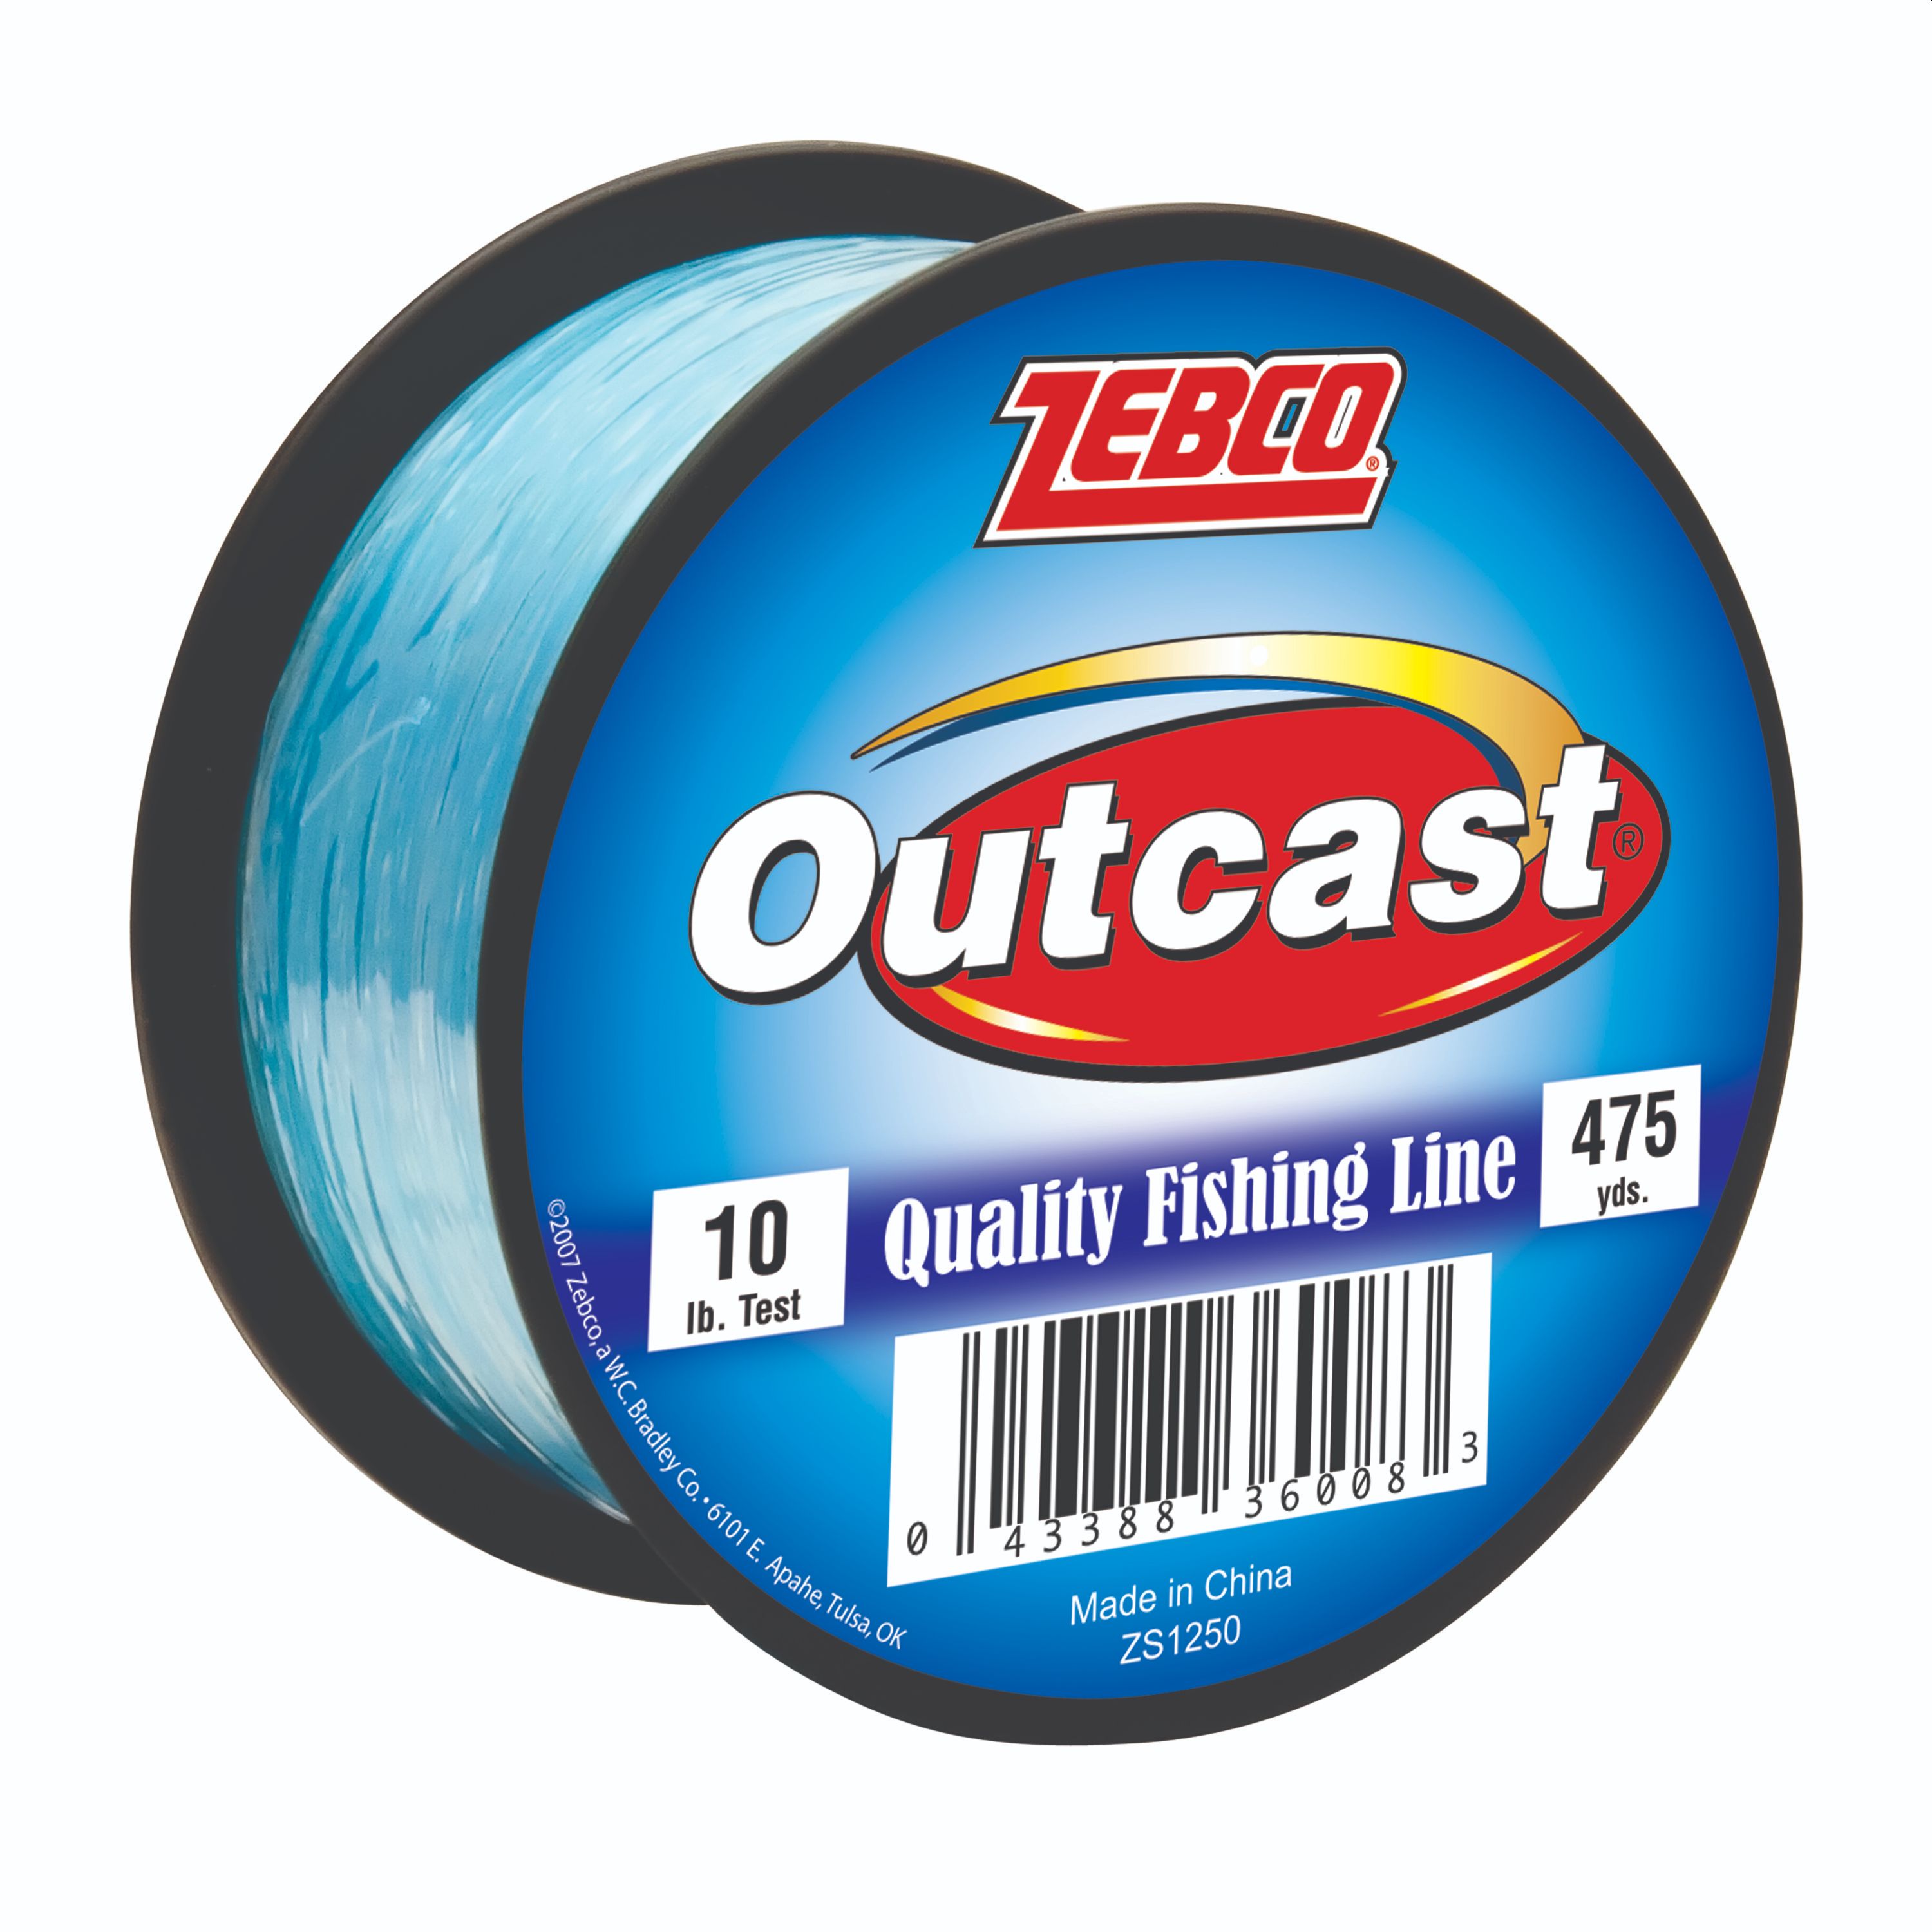 Zebco 21-10014 Outcast 10-Pound, 475-Yard, Blue Fishing Line at